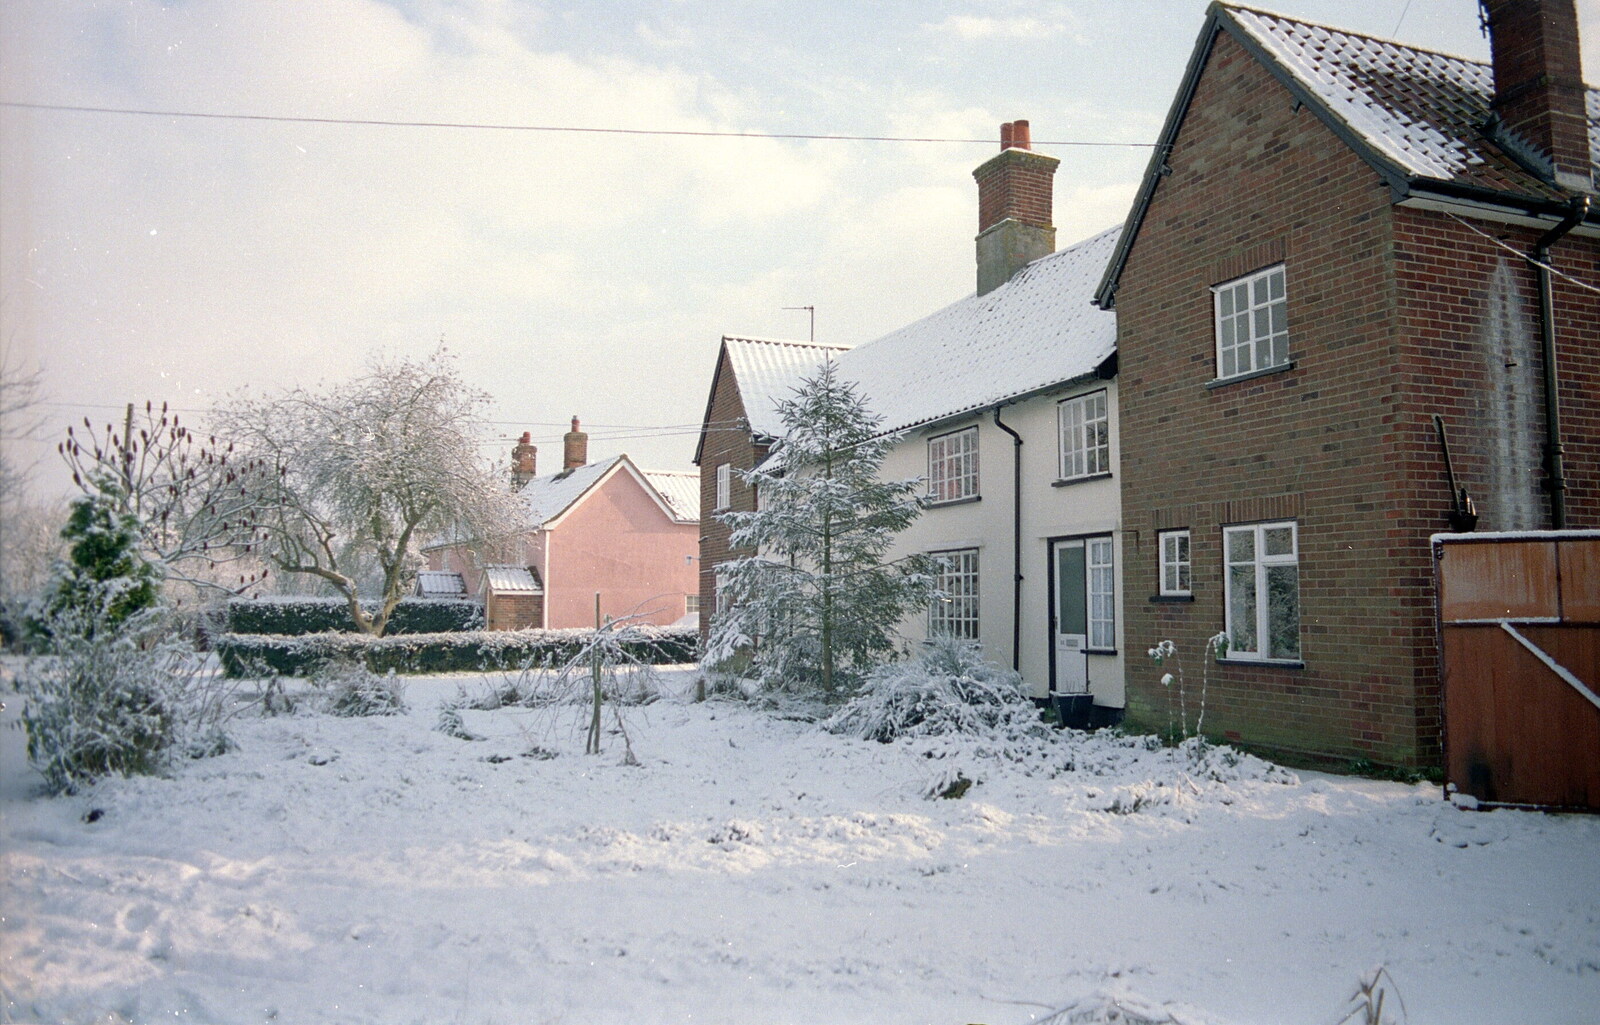 The front garden under snow from New Year's Eve at the Swan Inn, Brome, Suffolk - 31st December 1994